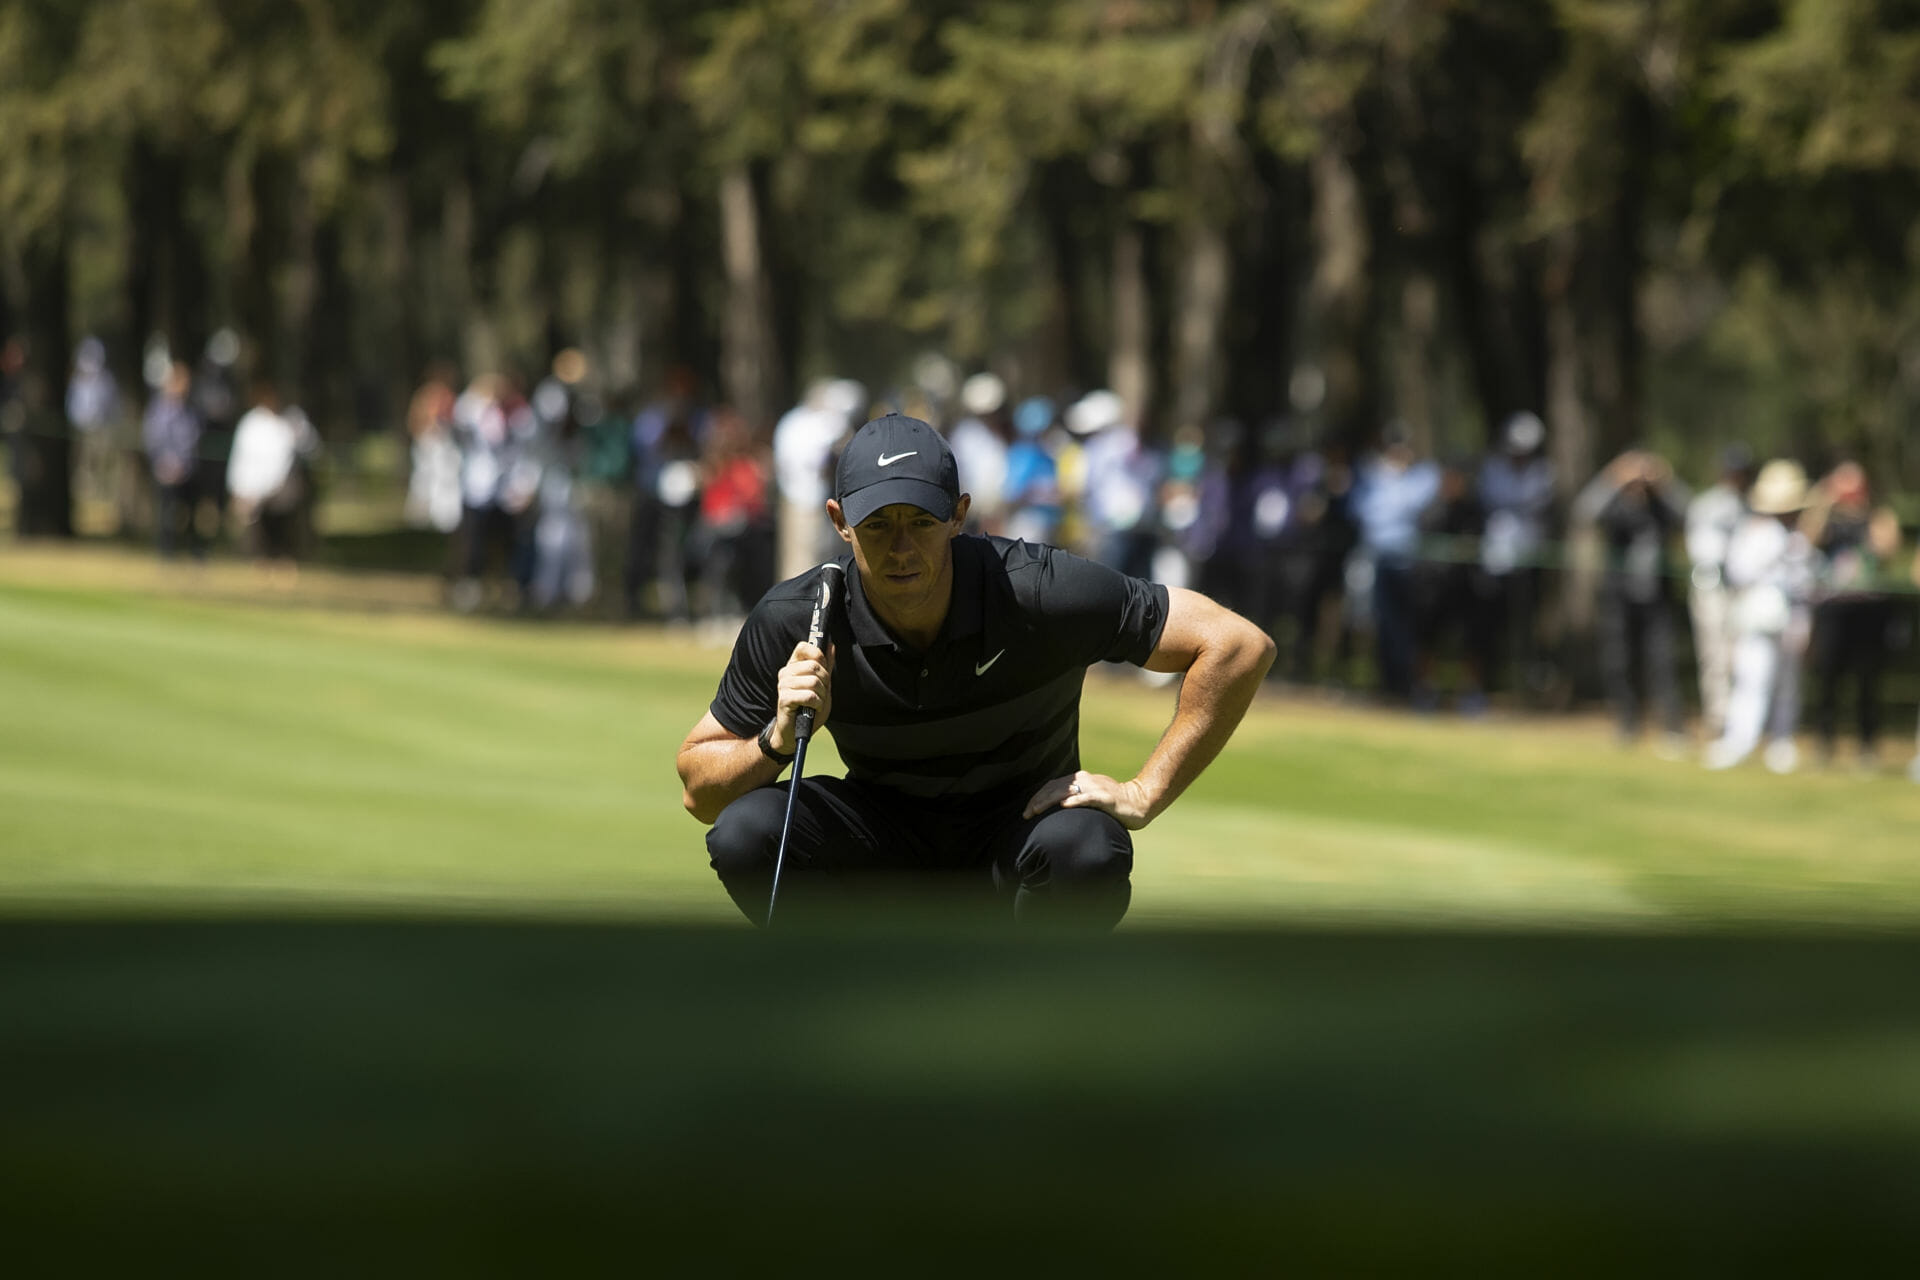 Putter switch inspires McIlroy to two shot lead in Mexico